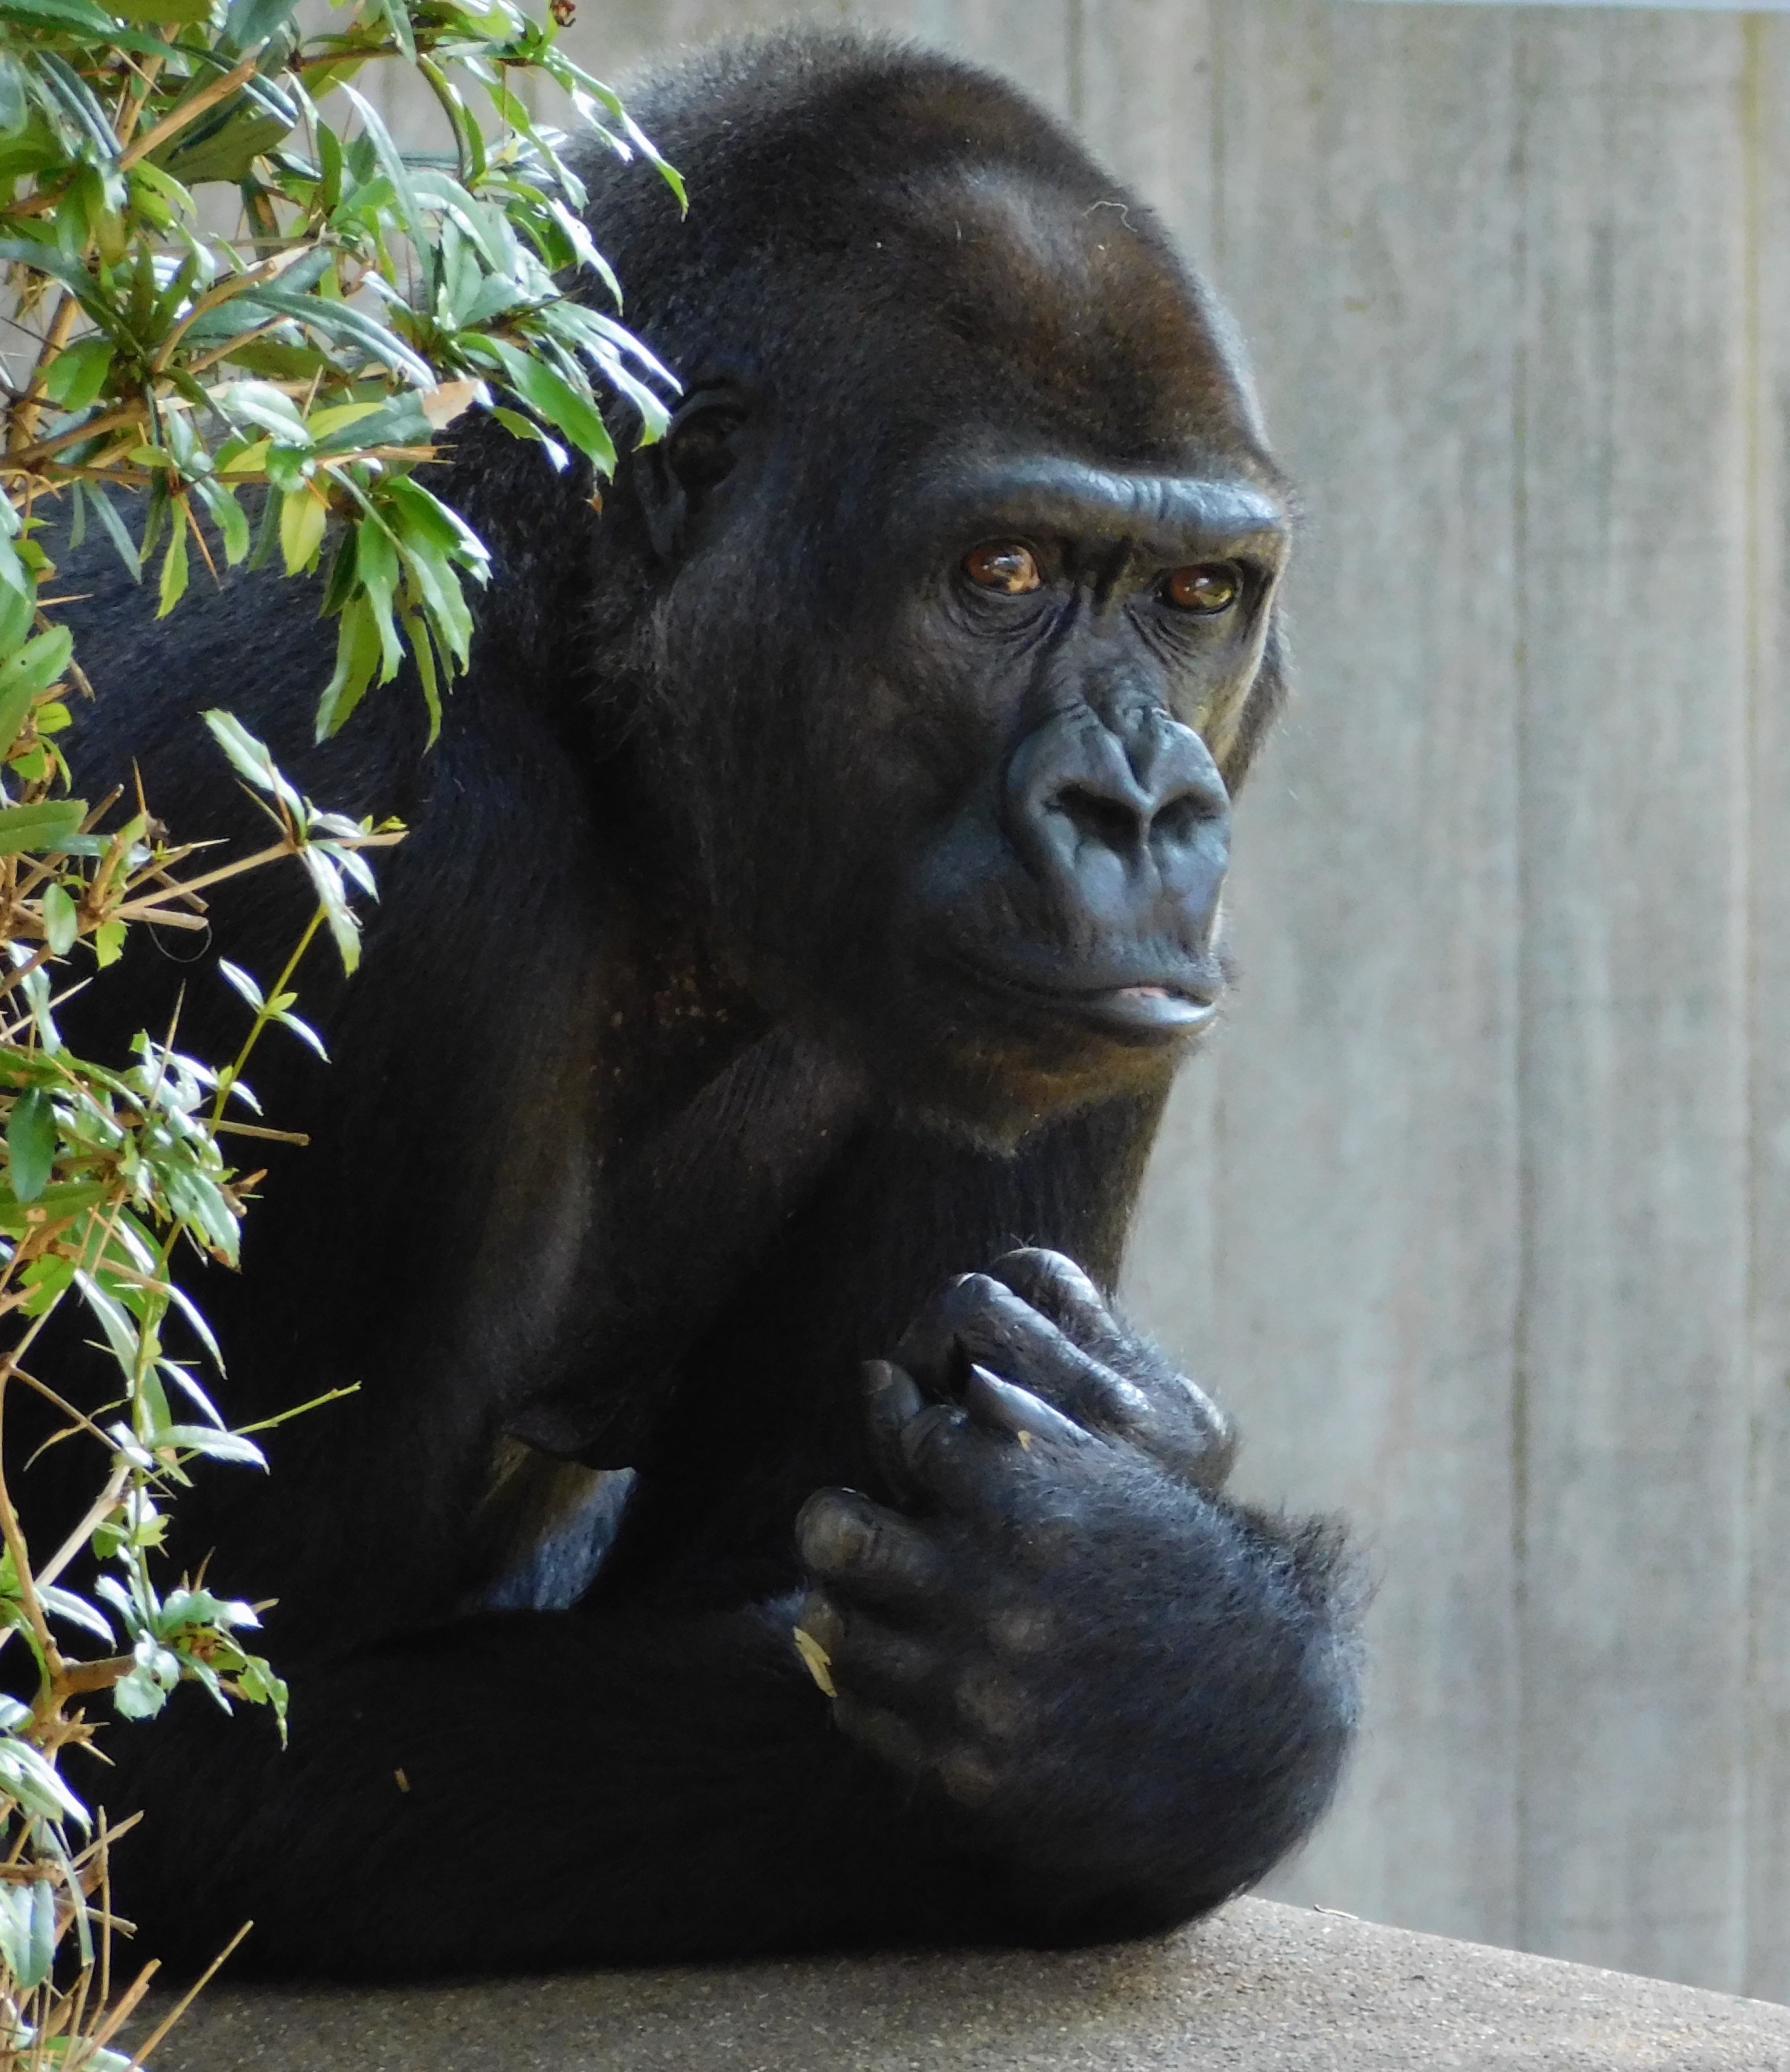 "Peering into the face of a relative. Photo taken at the National Zoo during data collection on gorilla nutrition and behavior." -Rhiannon Shultz